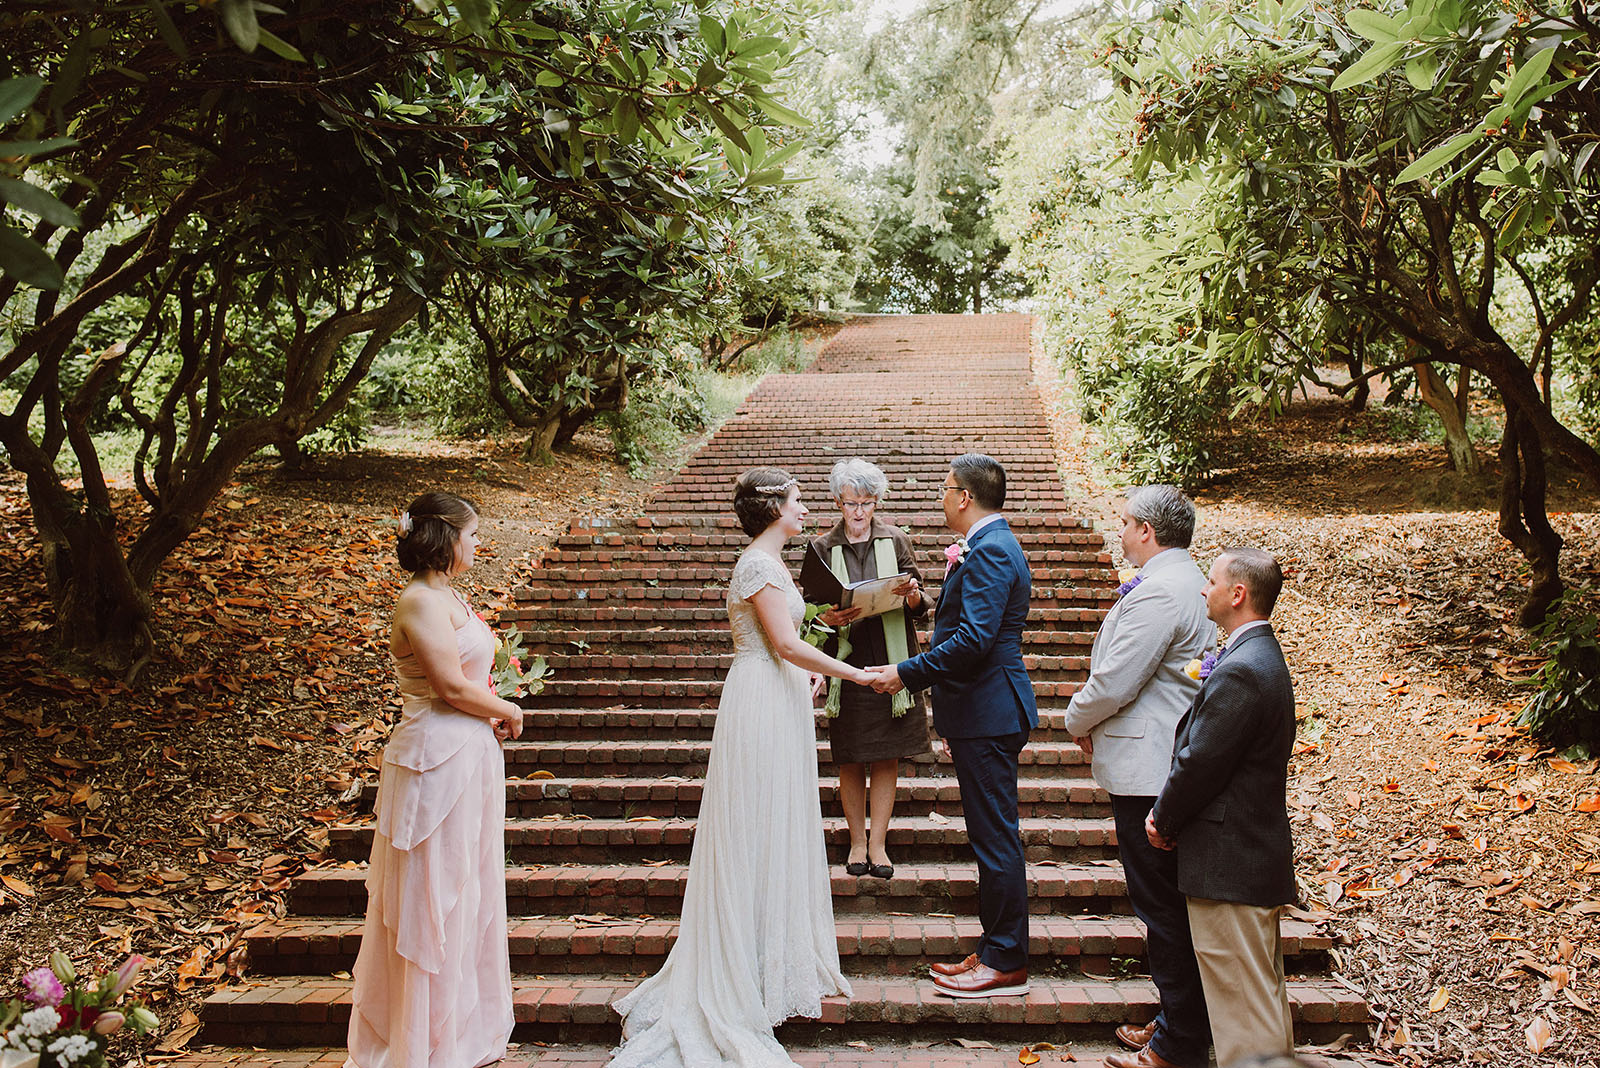 Ceremony on the stairs in Laurelhurst Park | Downtown Portland Elopement